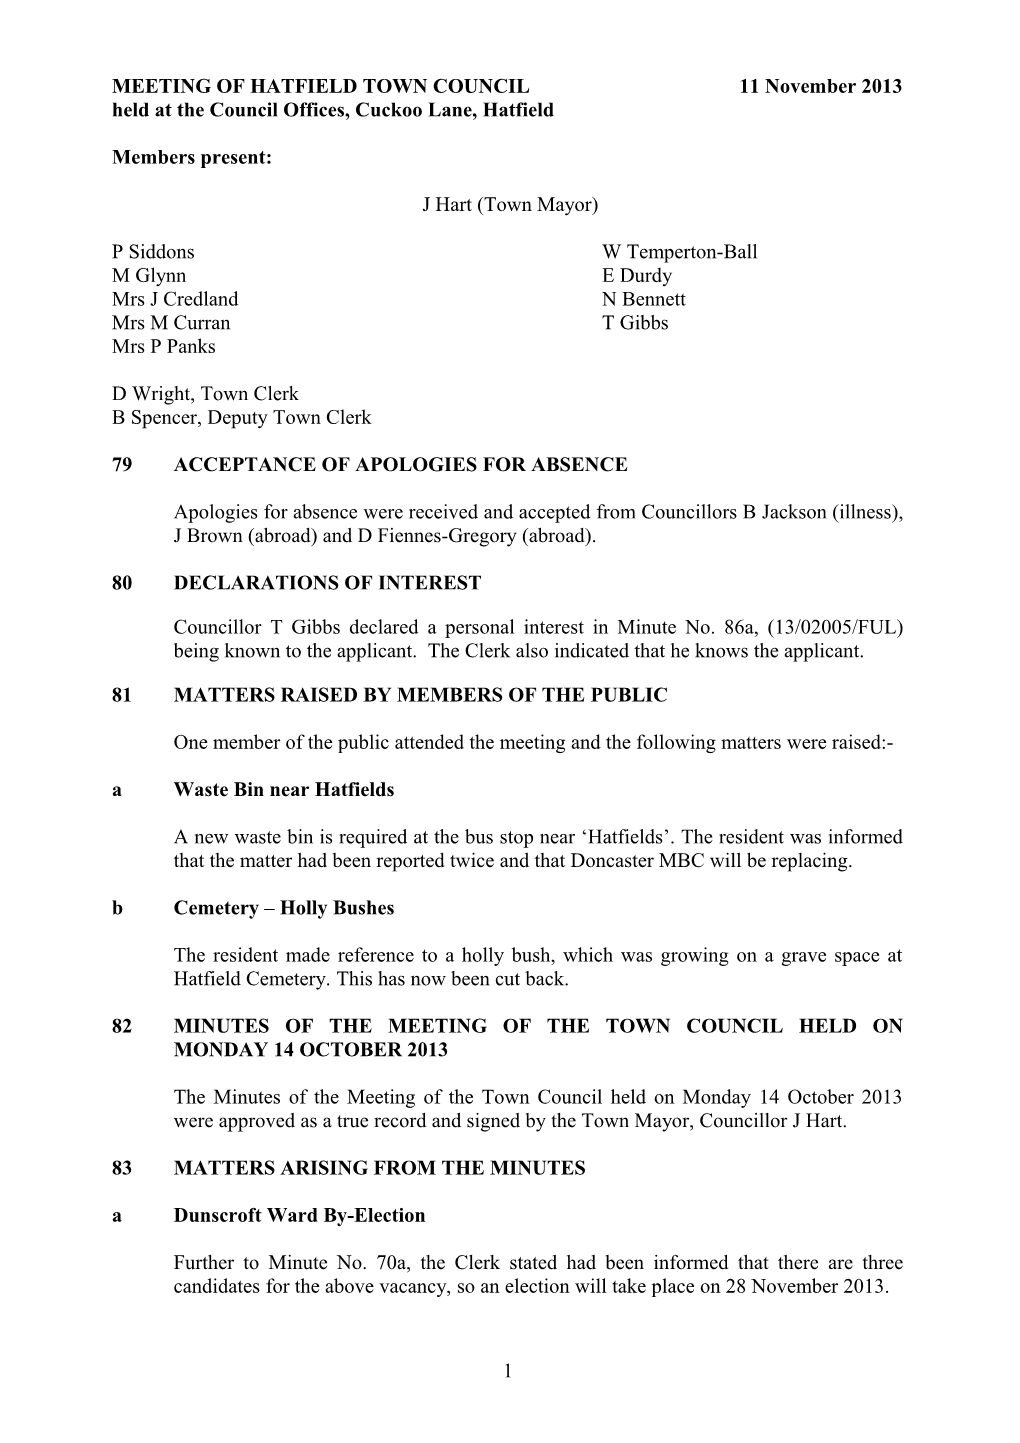 Meeting of Hatfield Town Council